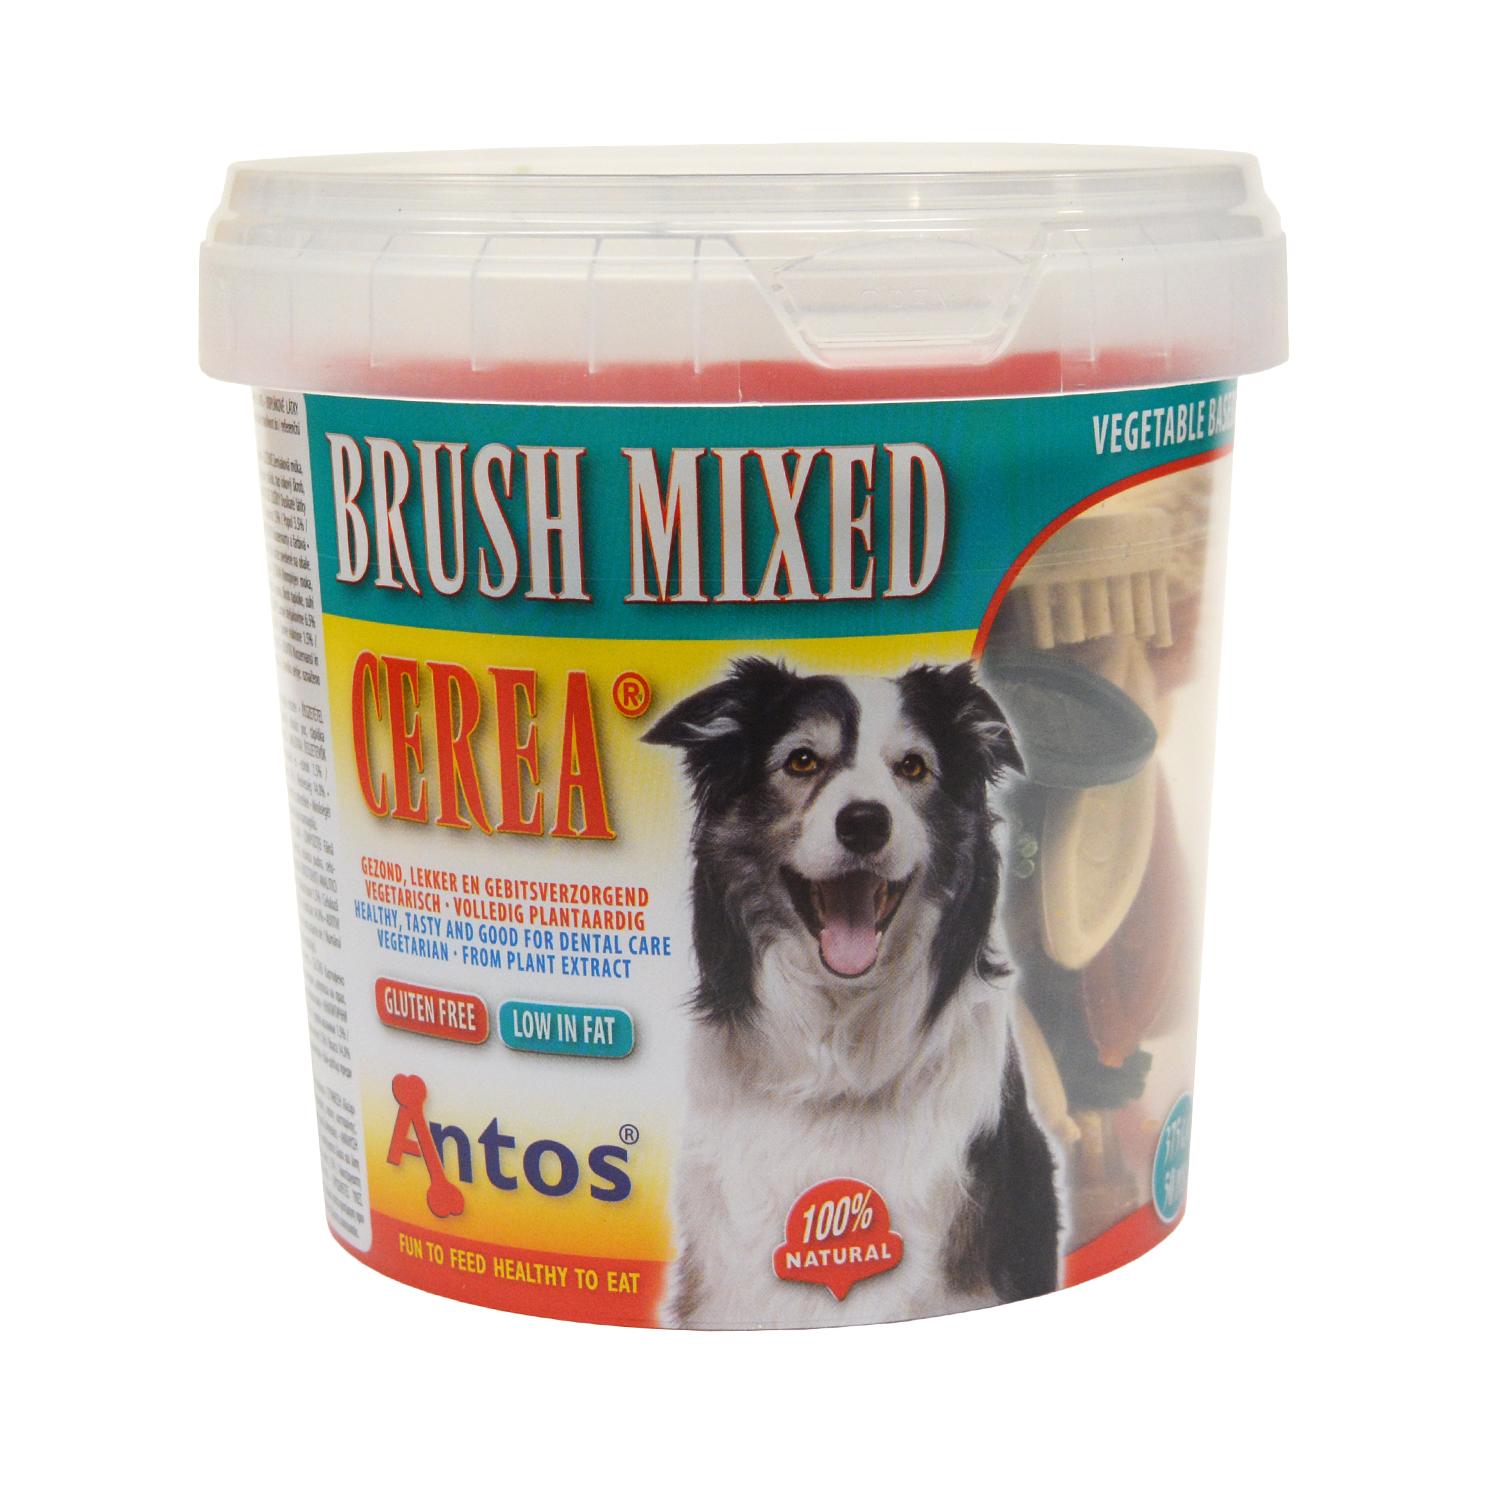 Front of a Tub of Cerea Mini Toothbrush Dog Chews